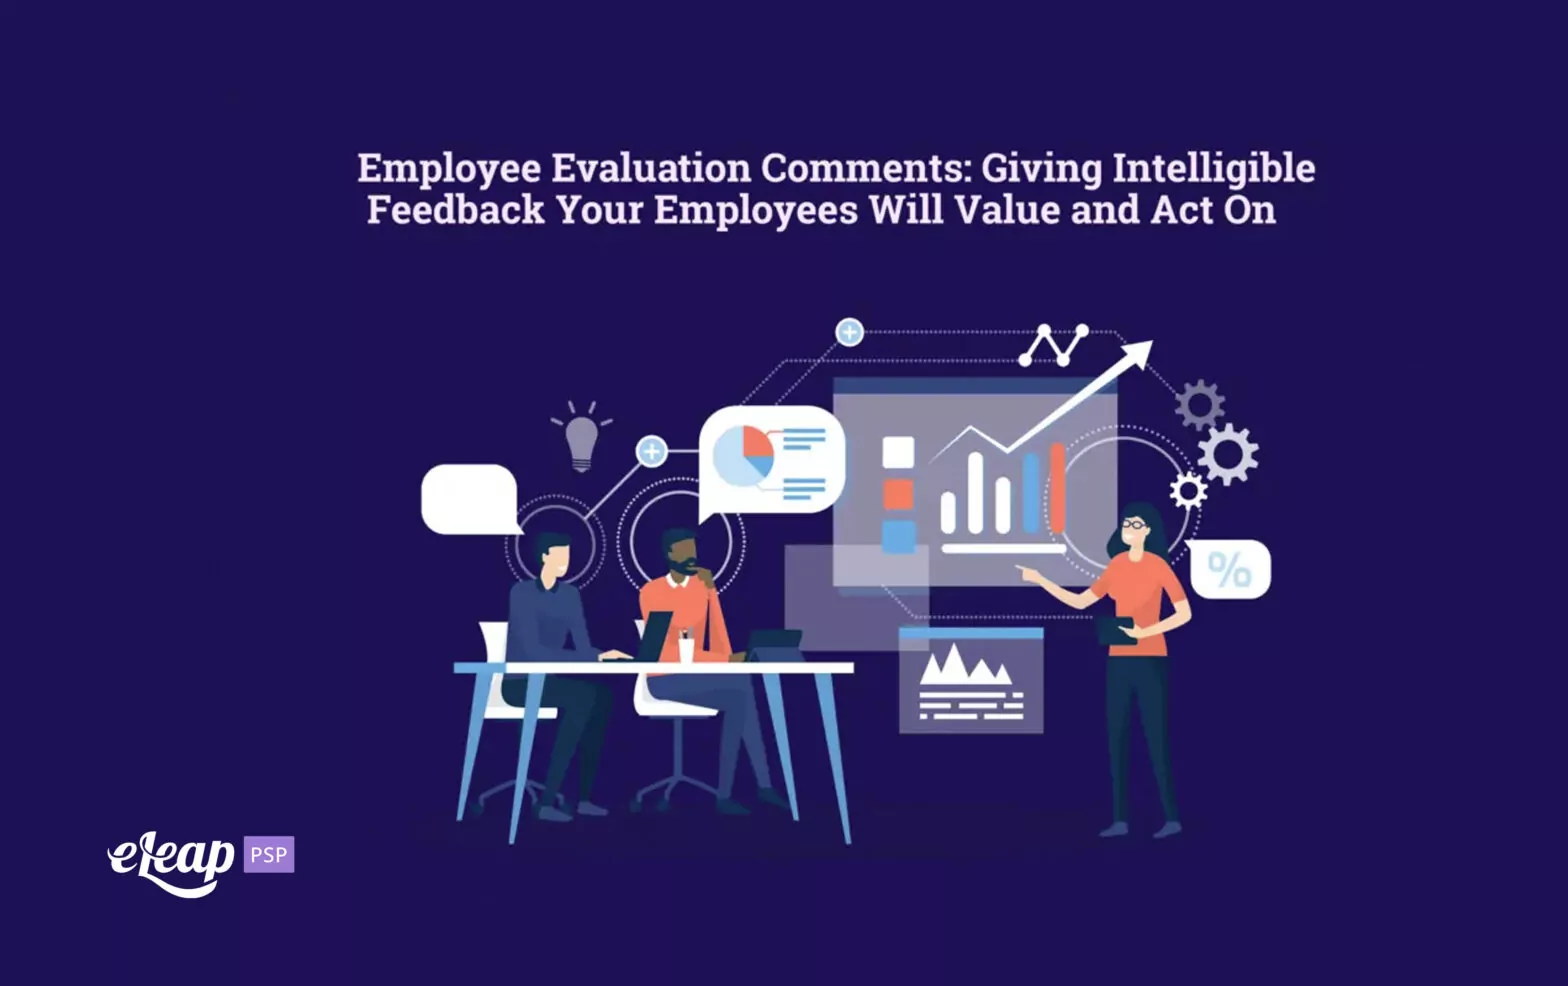 Employee Evaluation Comments: Giving Intelligible Feedback Your Employees Will Value and Act On